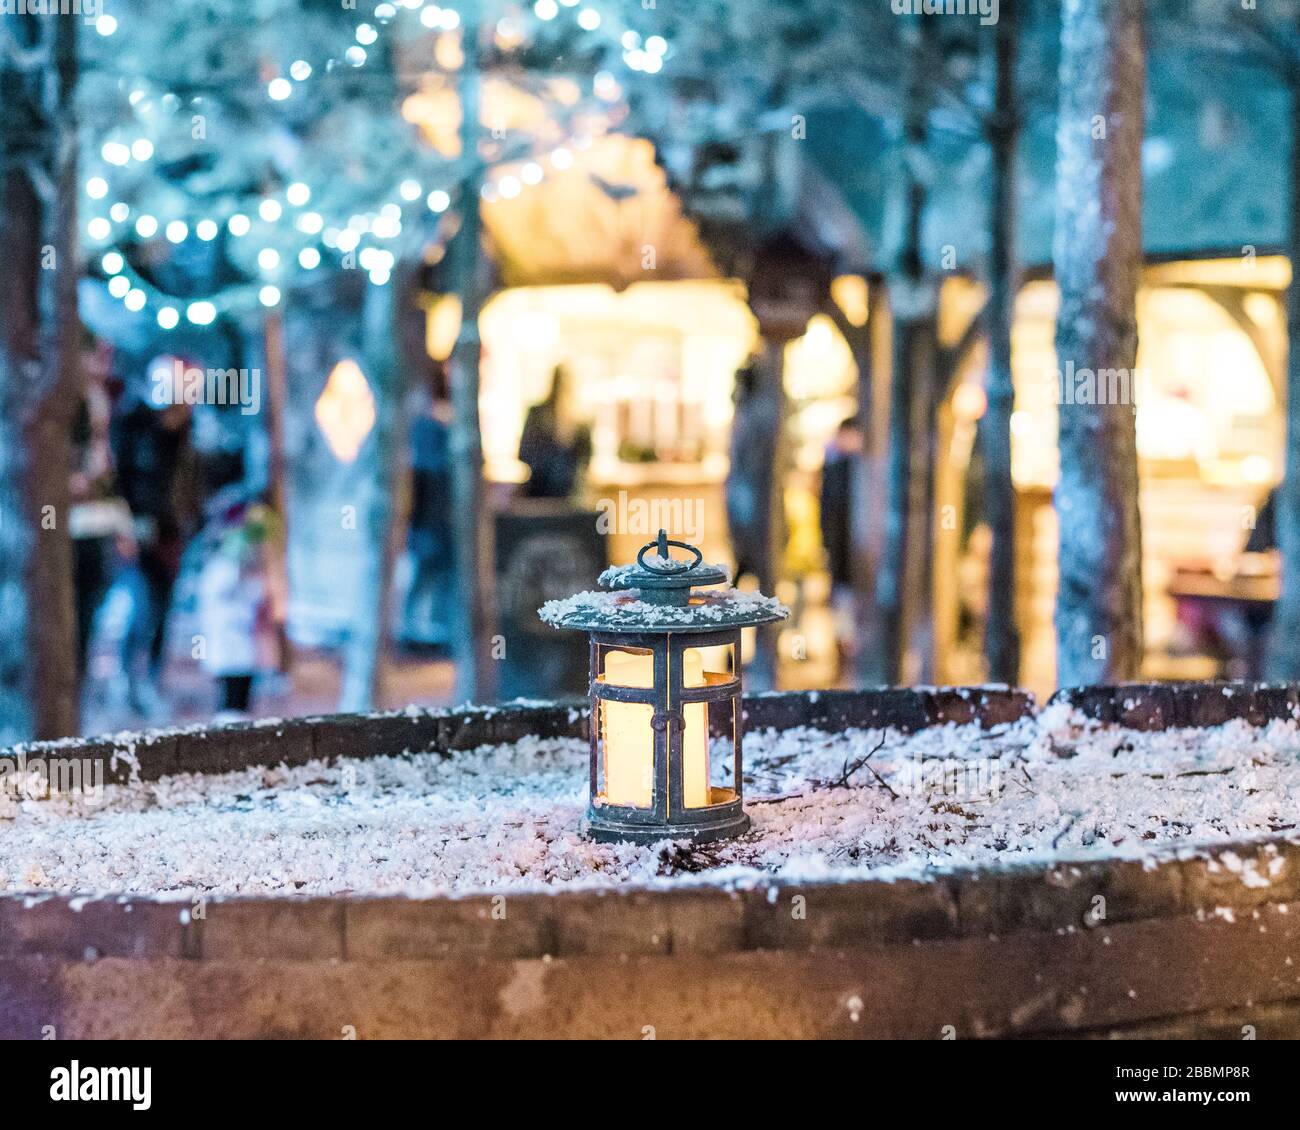 A glowing lantern on a snowy beer barrel at Christmas in England Stock Photo